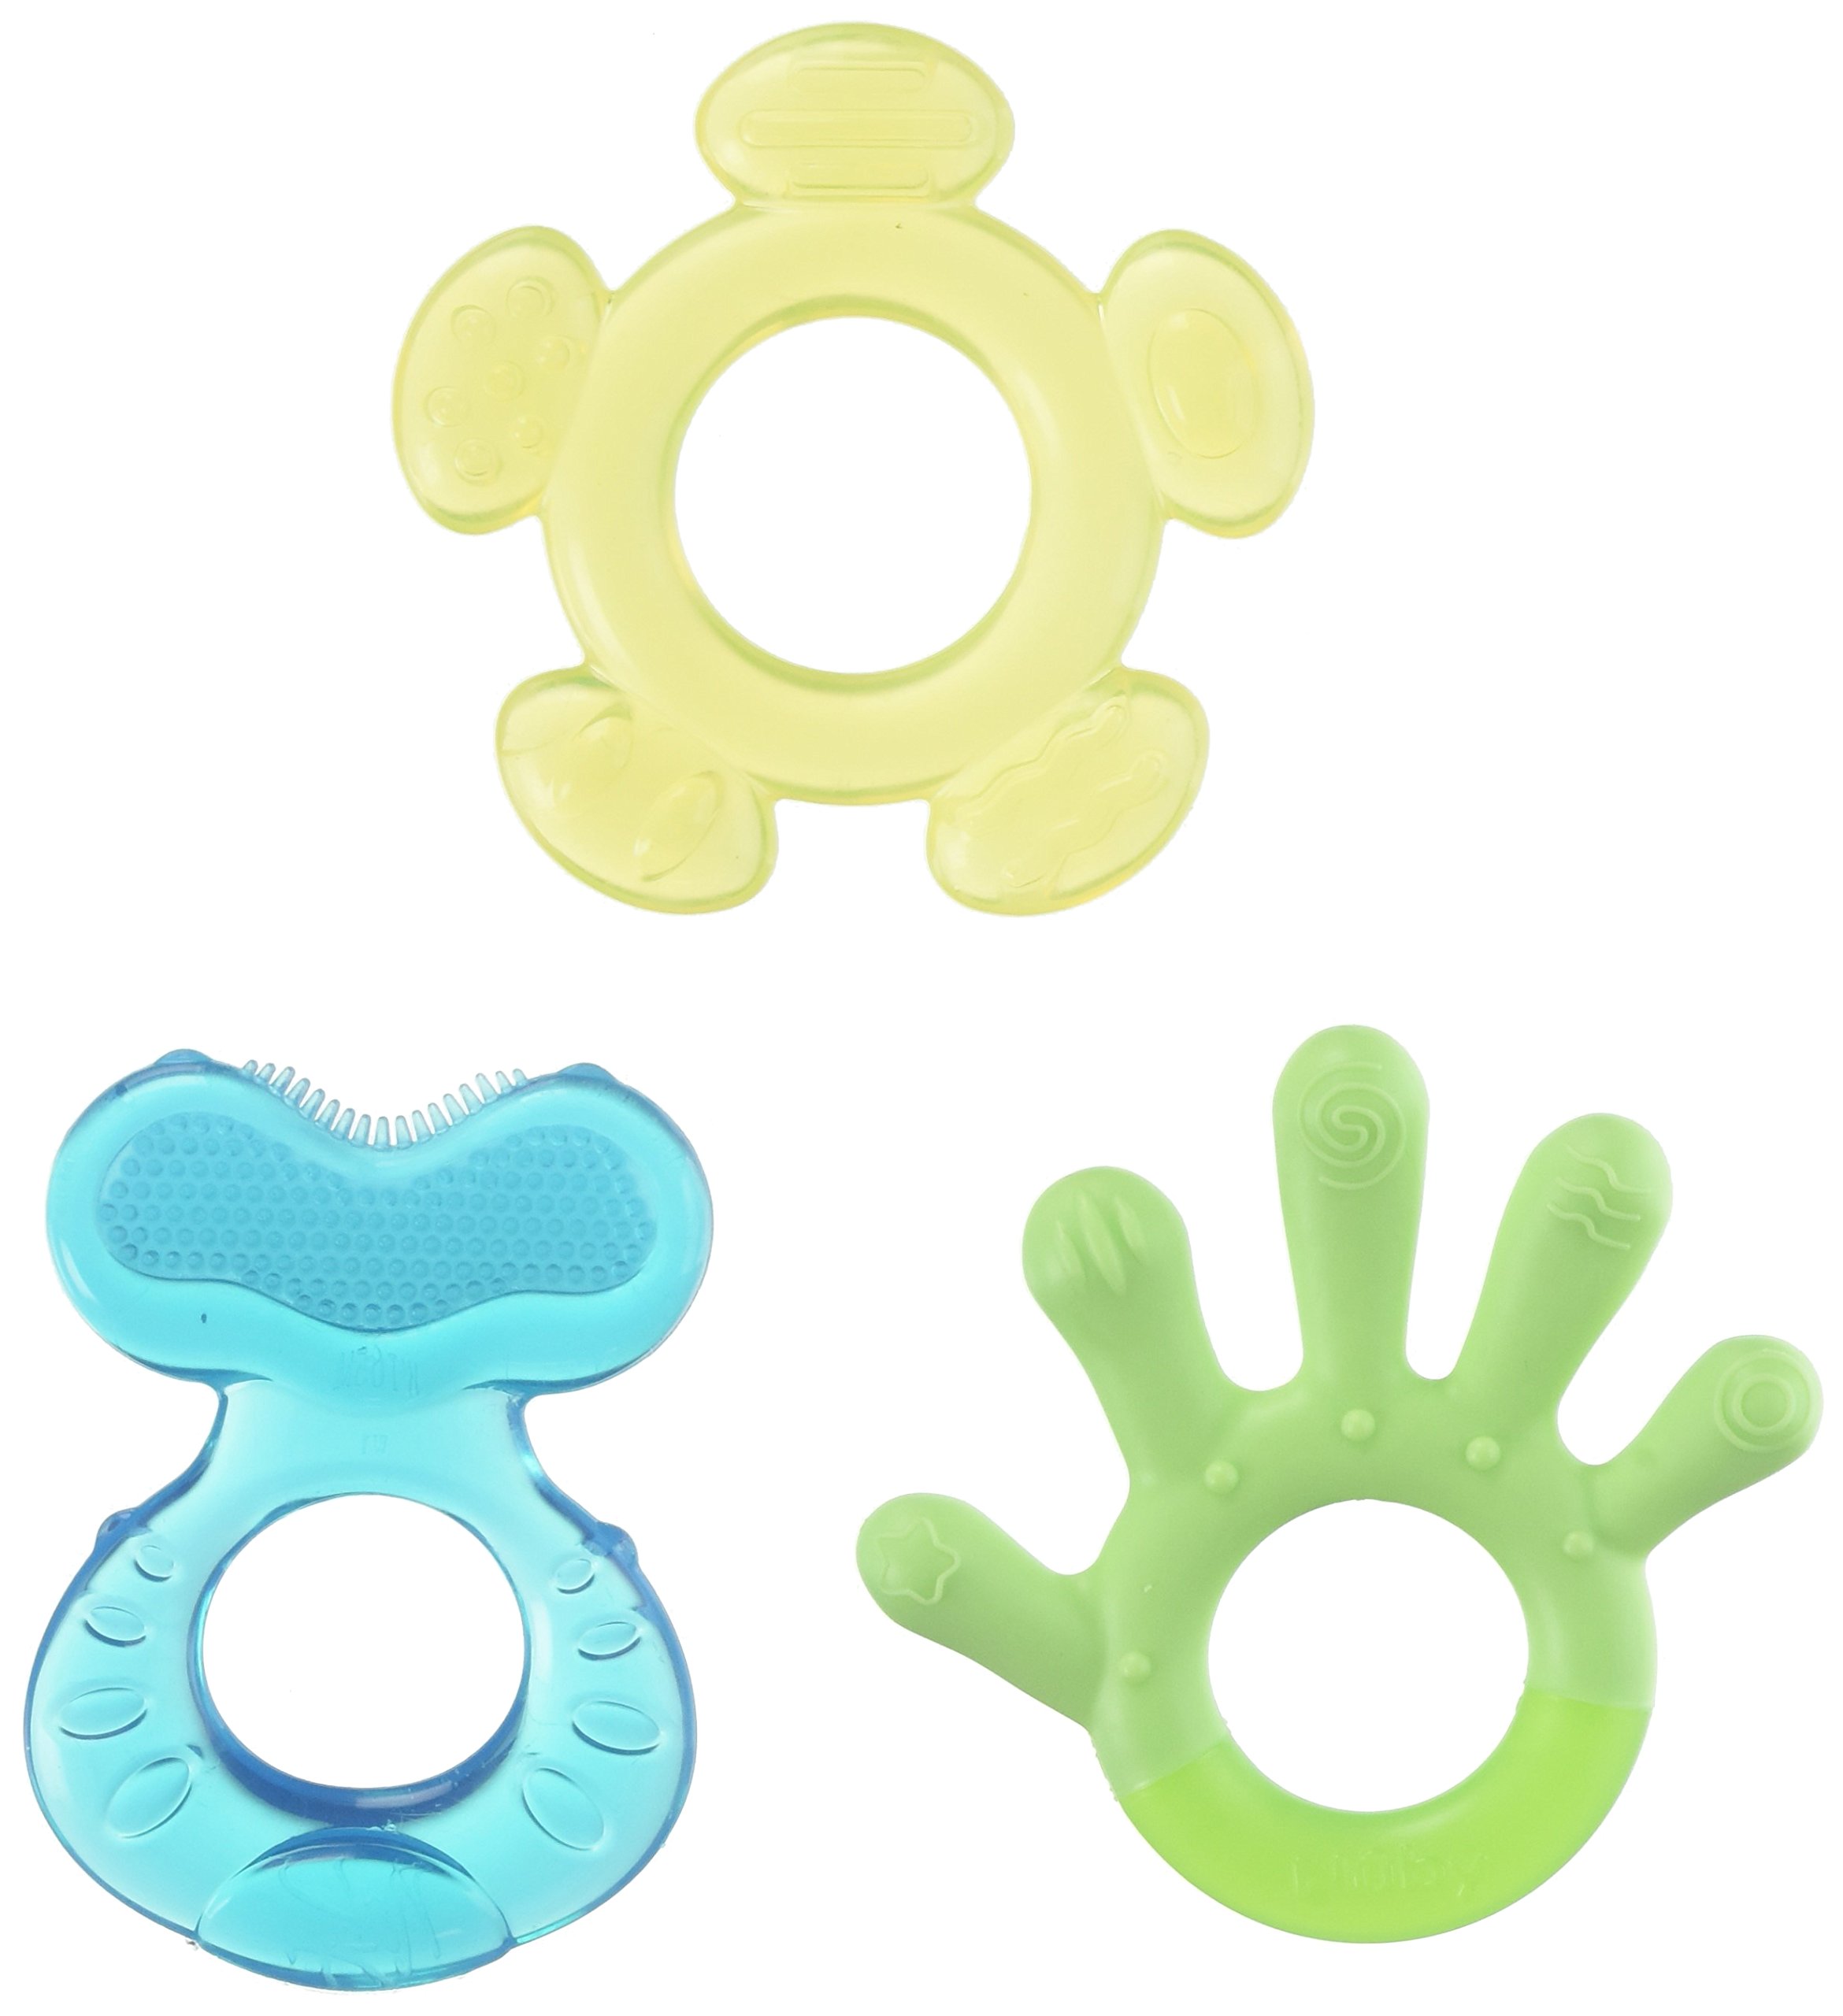 Nuby 3 Step Soothing Teether 3 Piece Set, BPA Free - Assorted Color